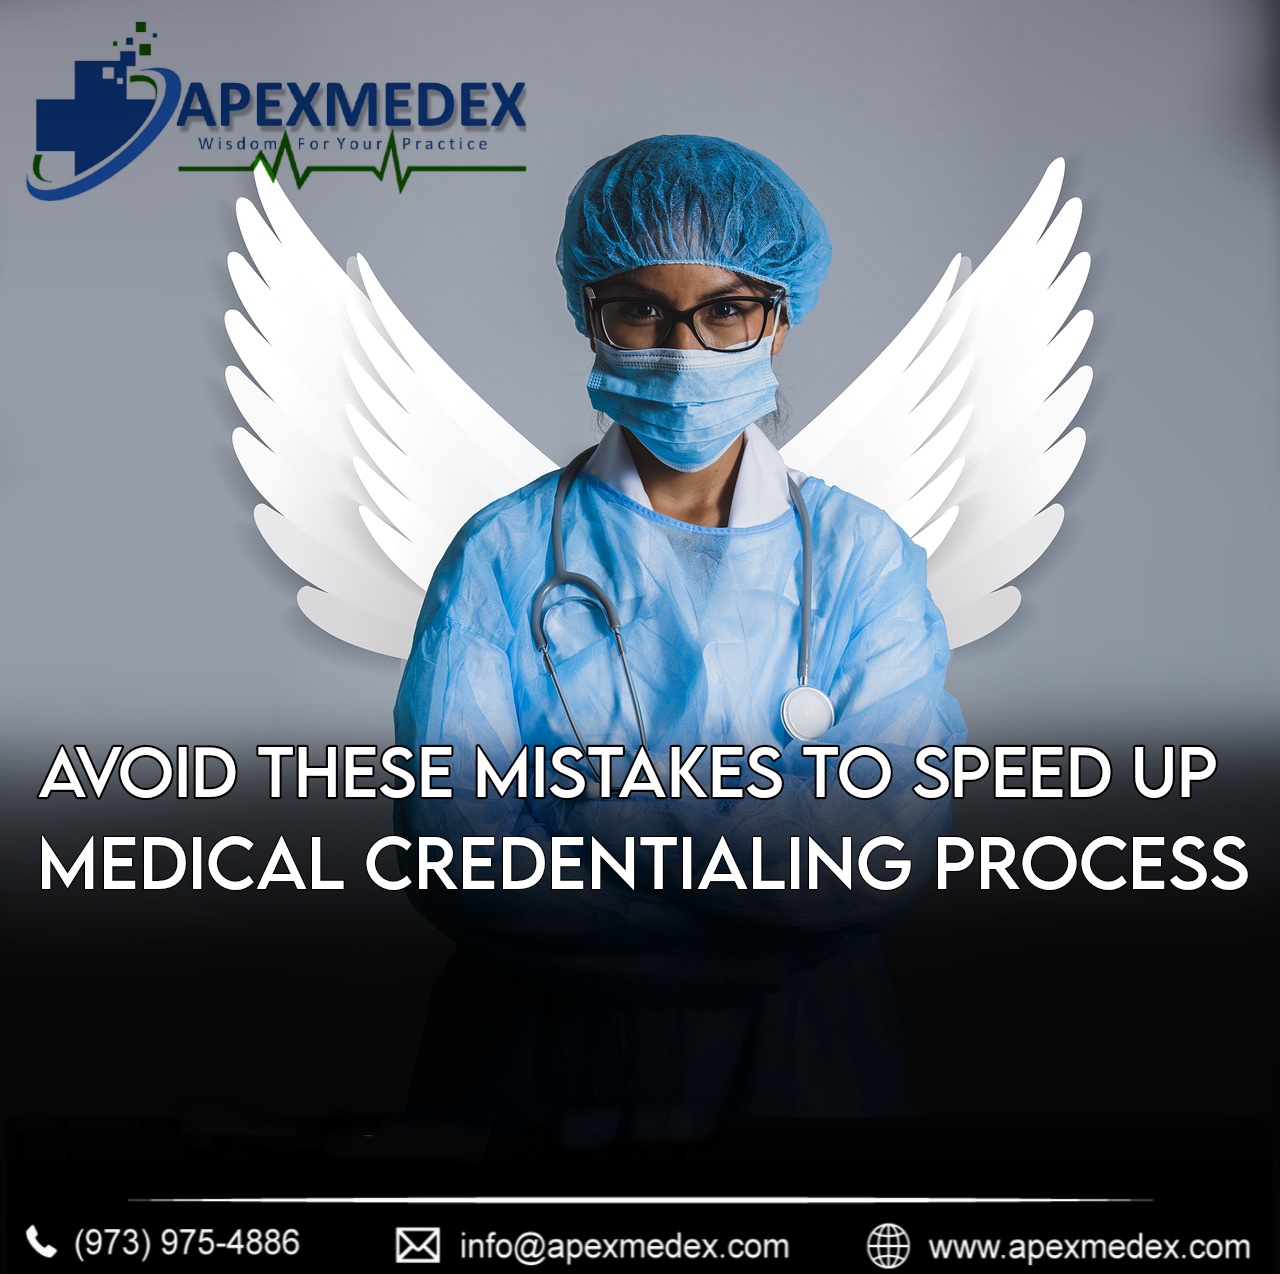 Avoid These 3 Mistakes To Speed Up Medical Credentialing Process